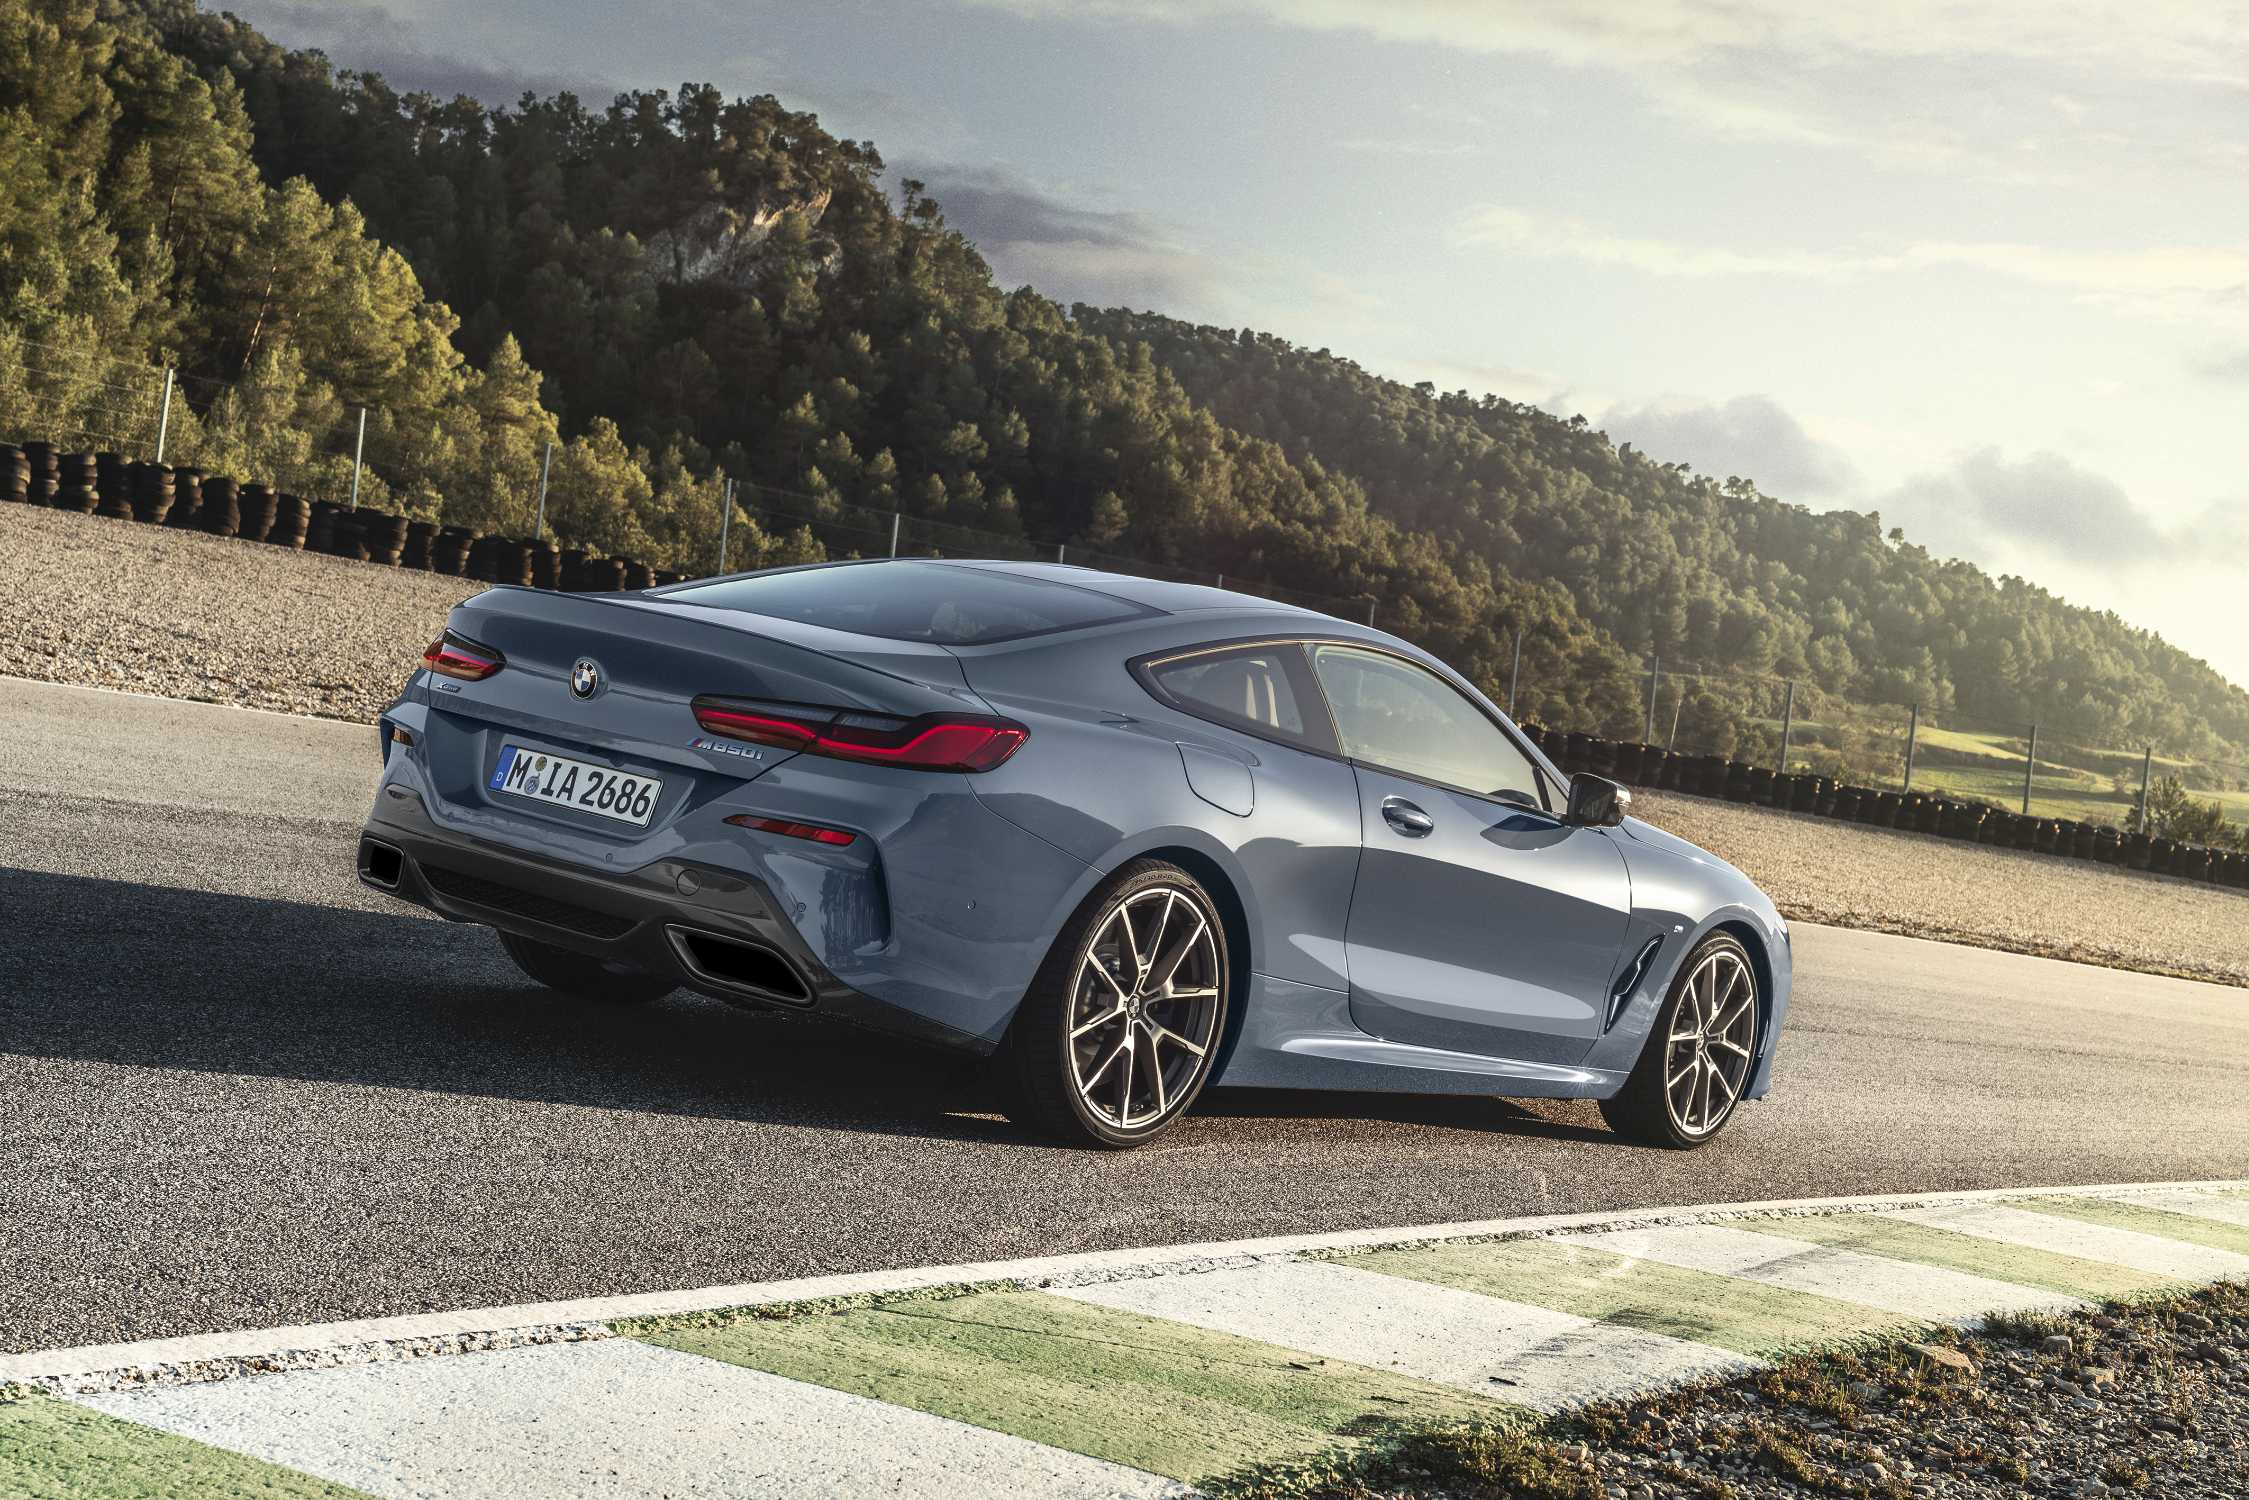 The all-new BMW 8 Series Coupe (06/2018).